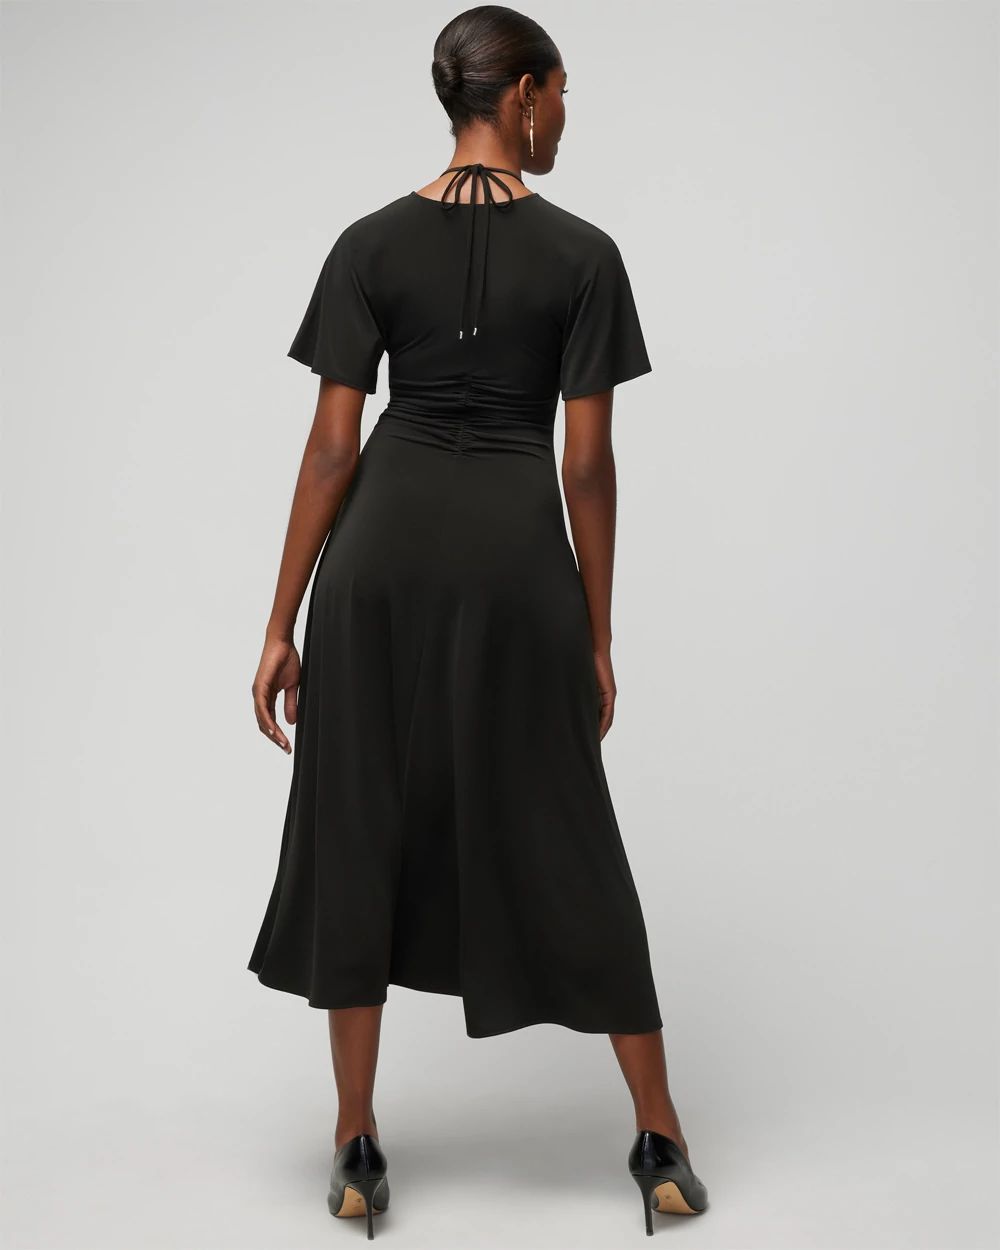 Short-Sleeve Ruched Front Midi Dress click to view larger image.